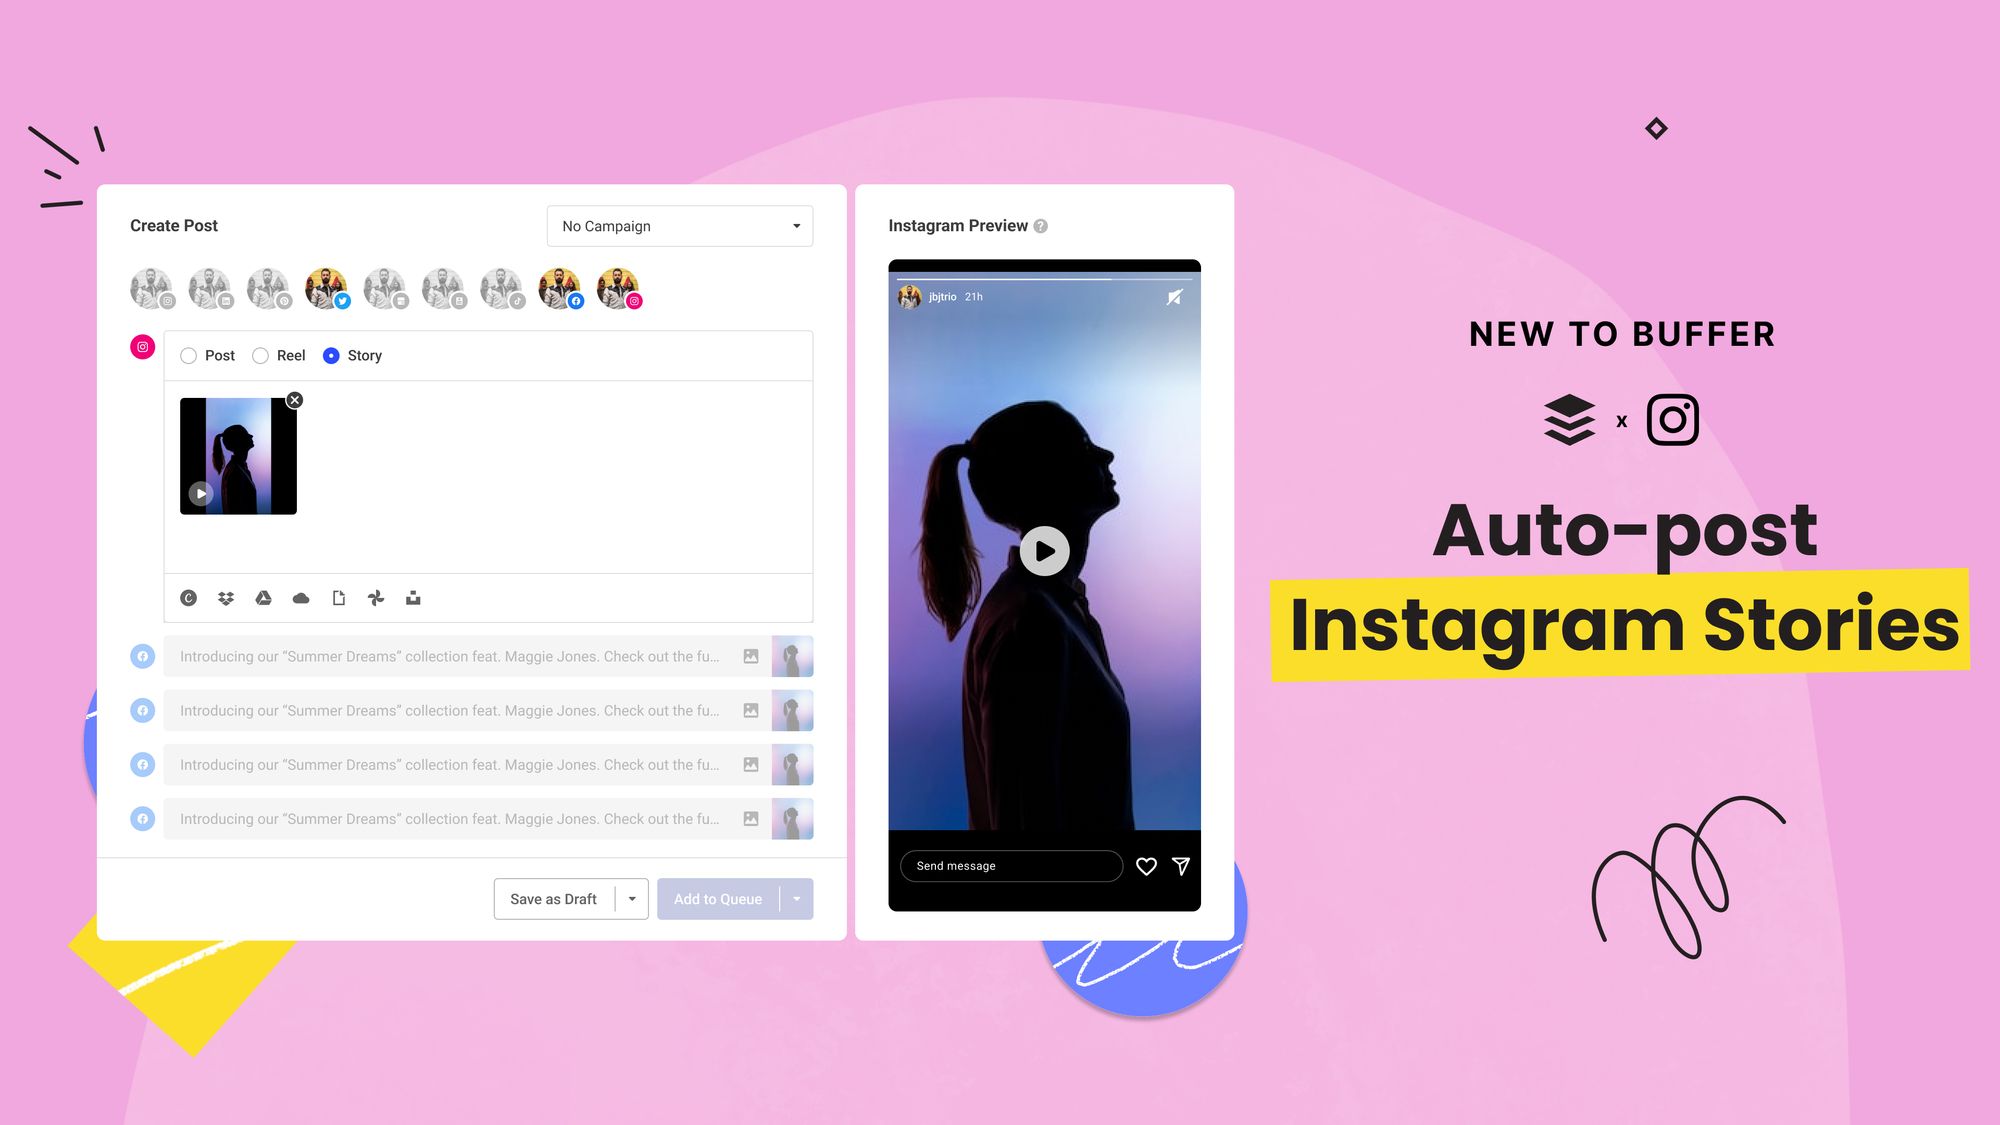 A screenshot of the Buffer website with the caption "New to Buffer. Autopost Instagram Stories"